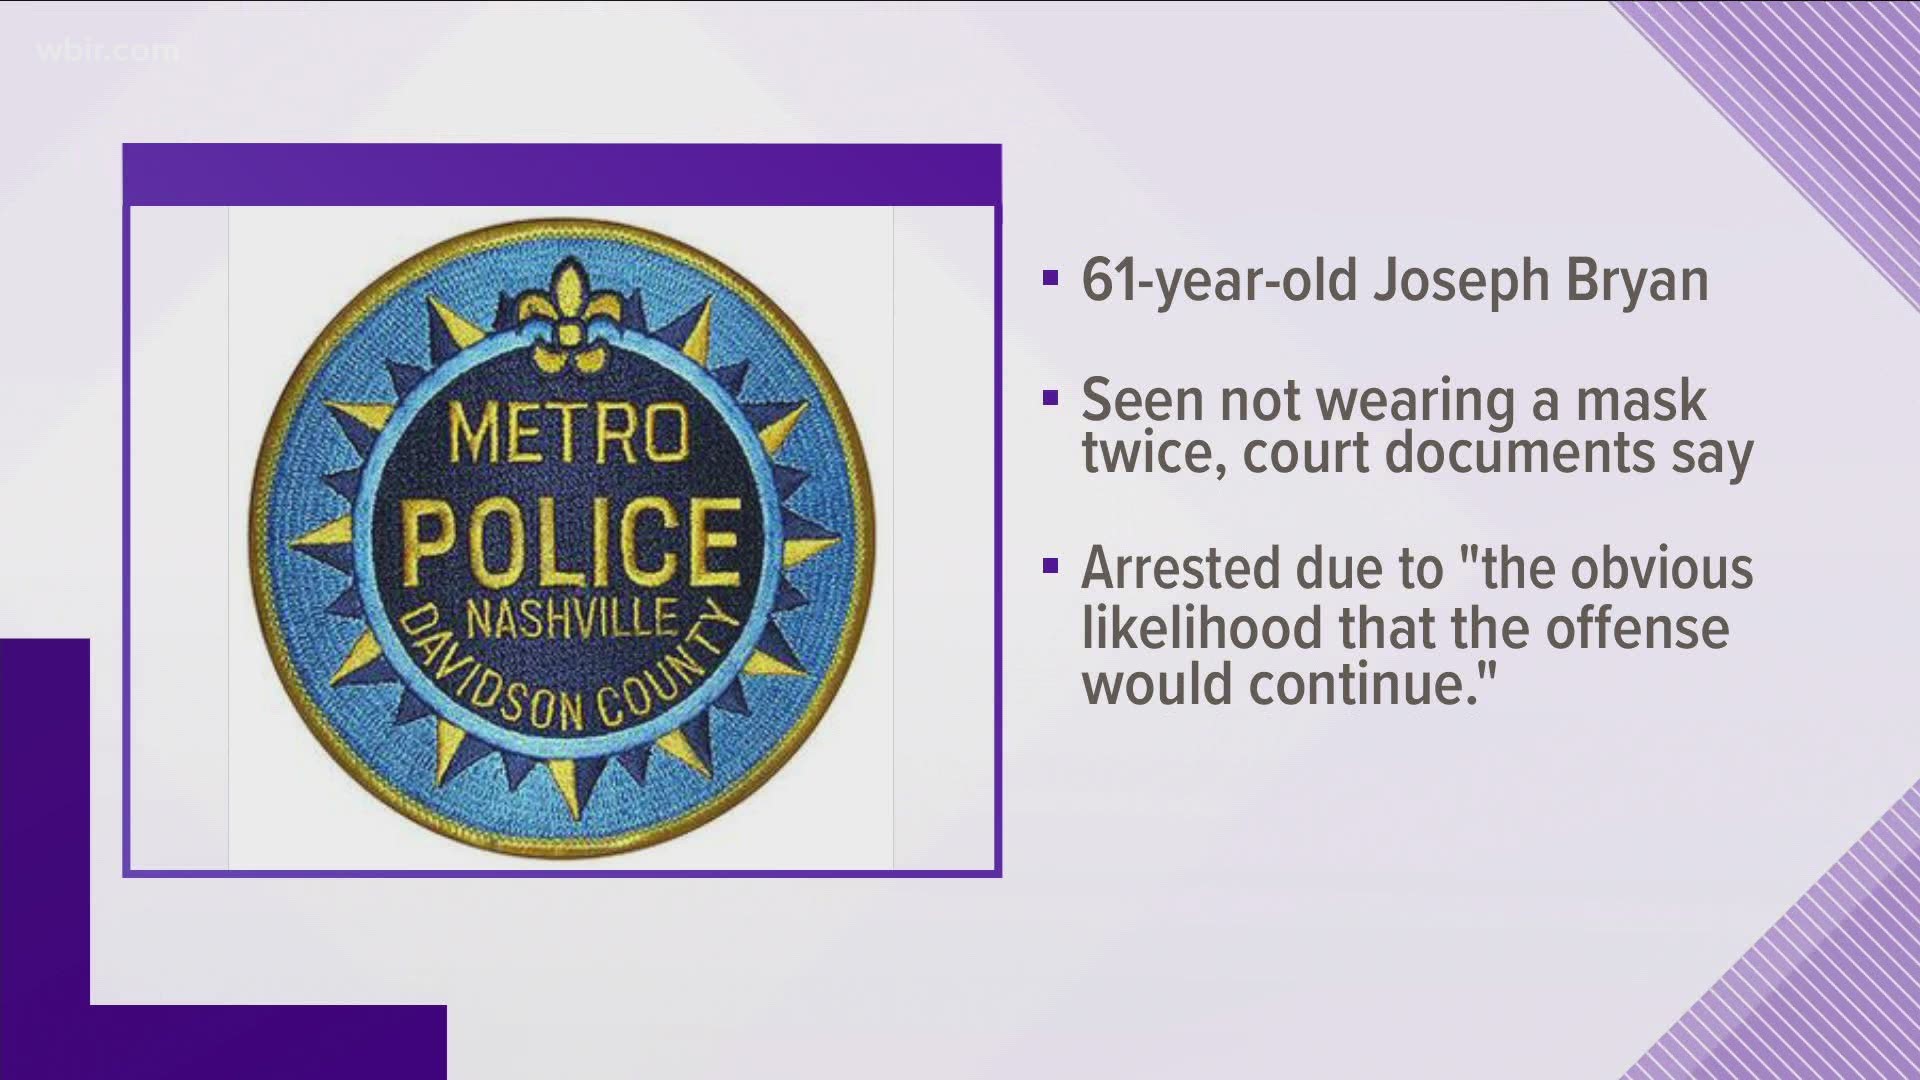 Metro Police says officers cited 61-year-old Joseph Bryan for not wearing a mask around 6:30 Wednesday night.